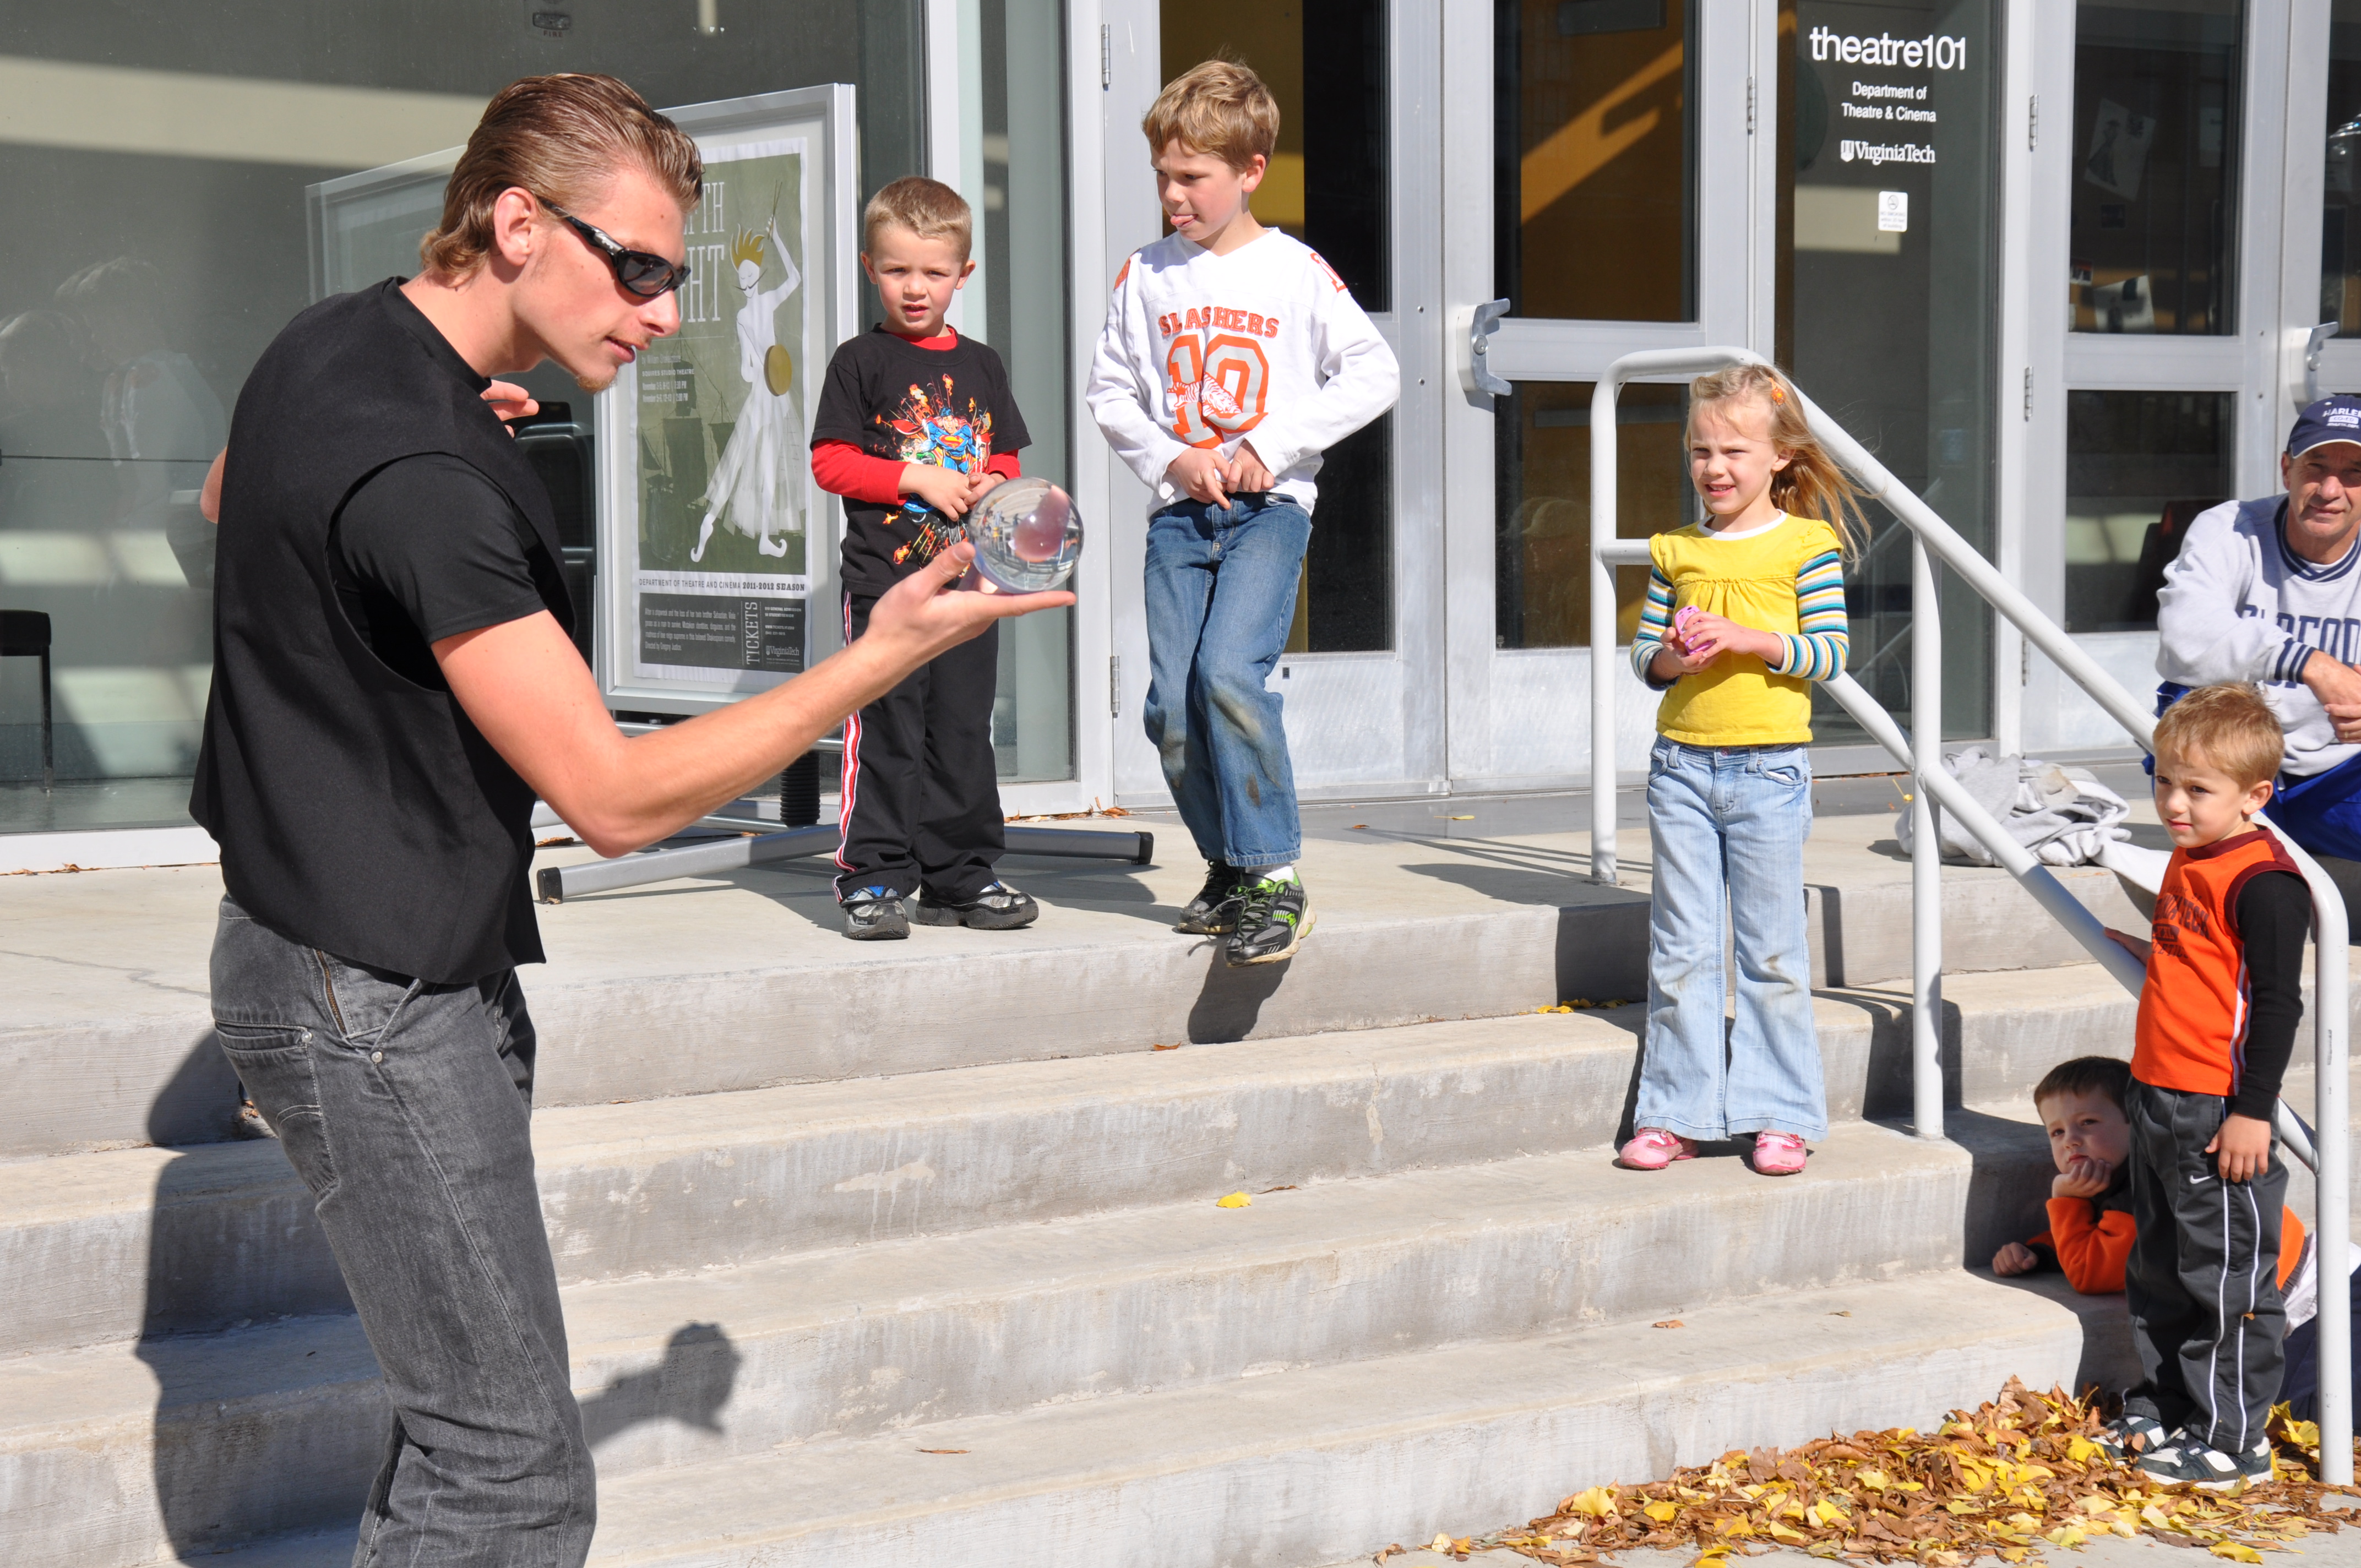 Youngsters watch with anticipation as a Virginia Tech student entertains them with illusions.